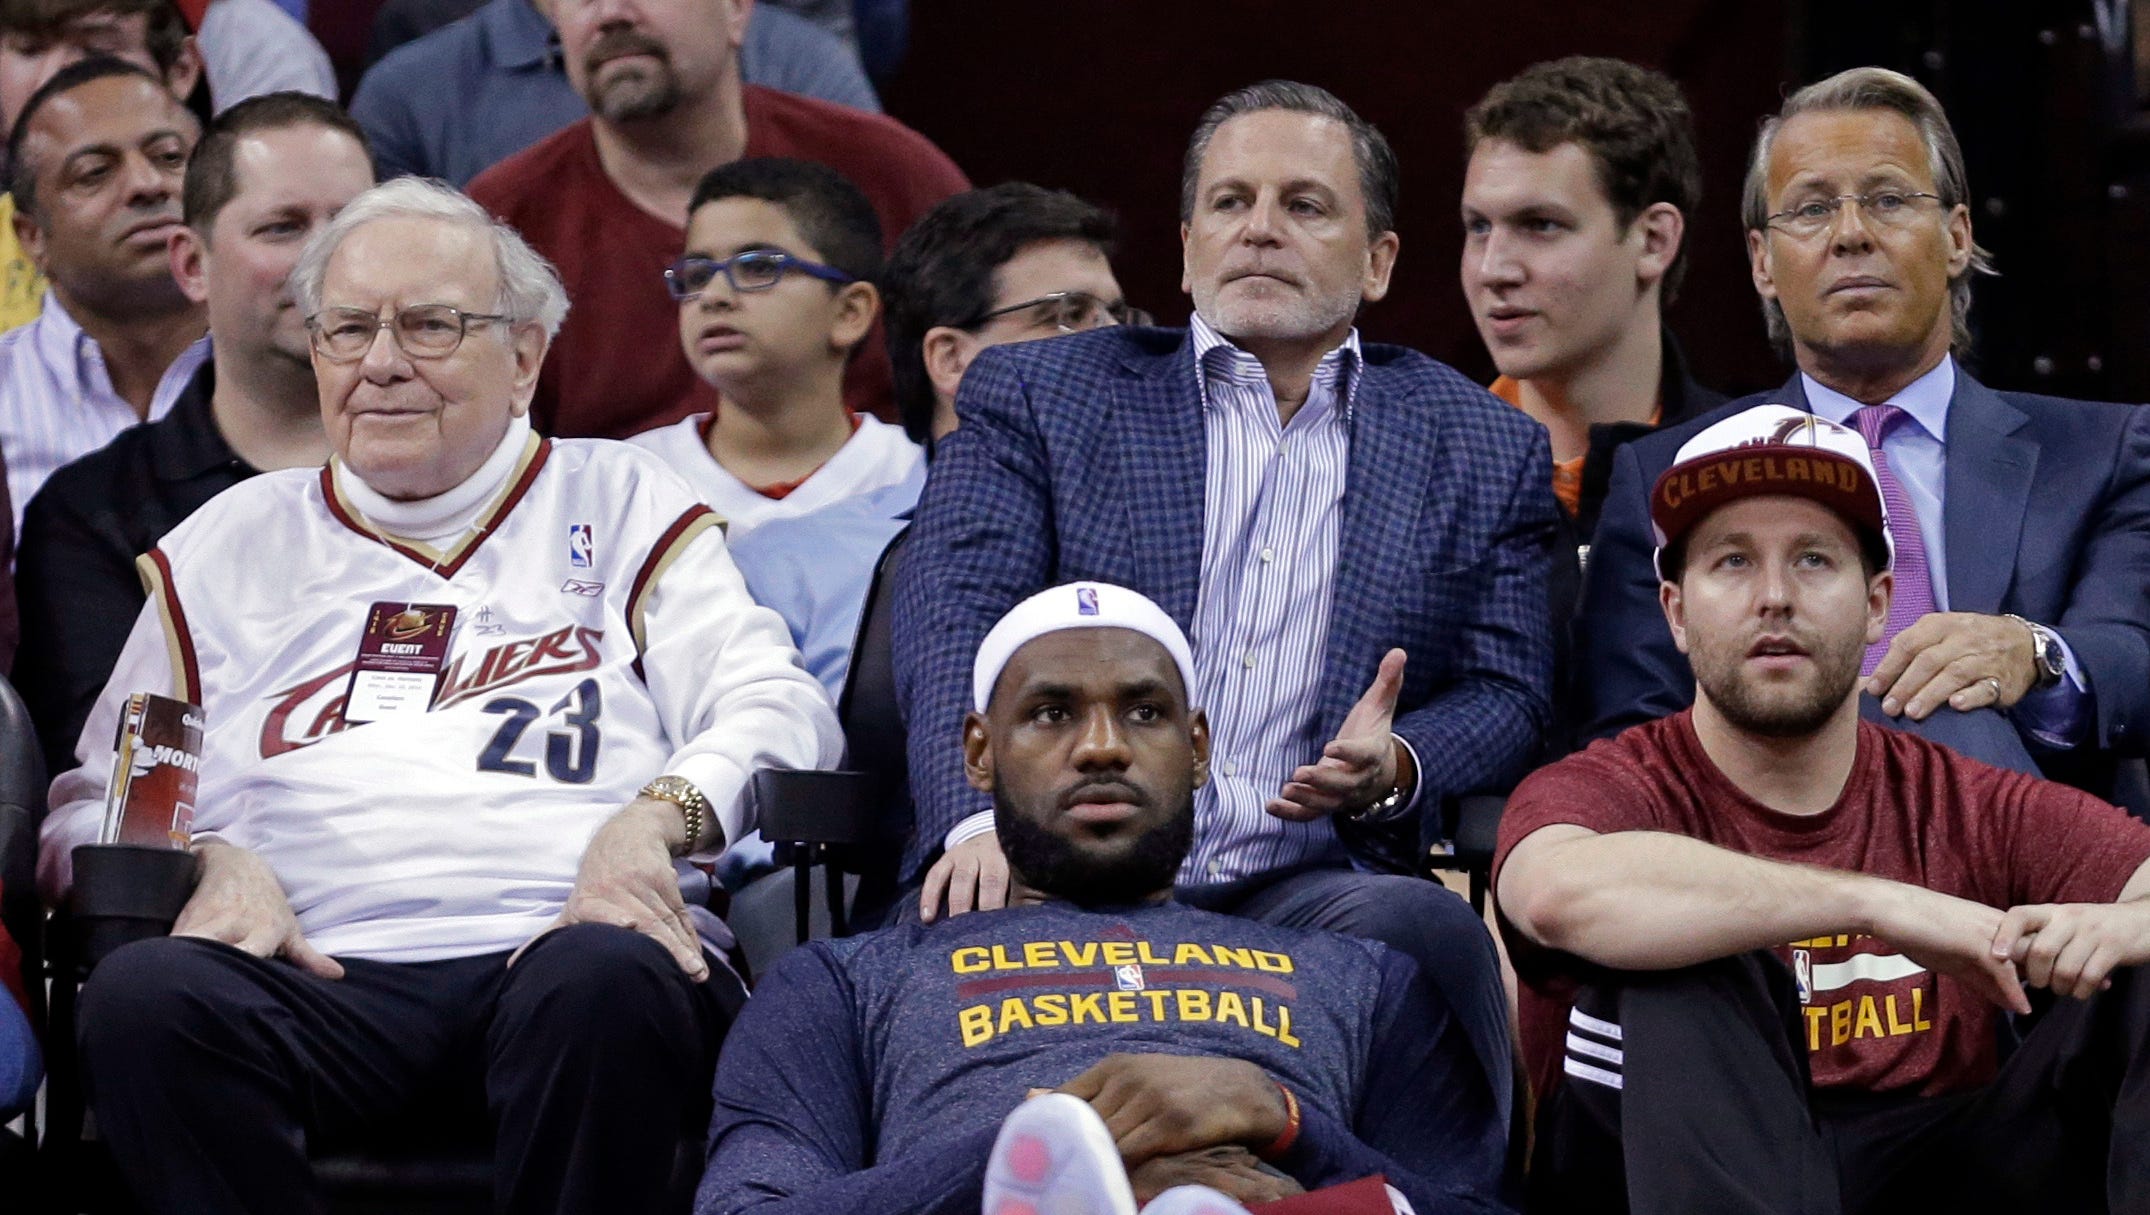 Dan Gilbert sits behind the star of his franchise, LeBron James, during a game in December.